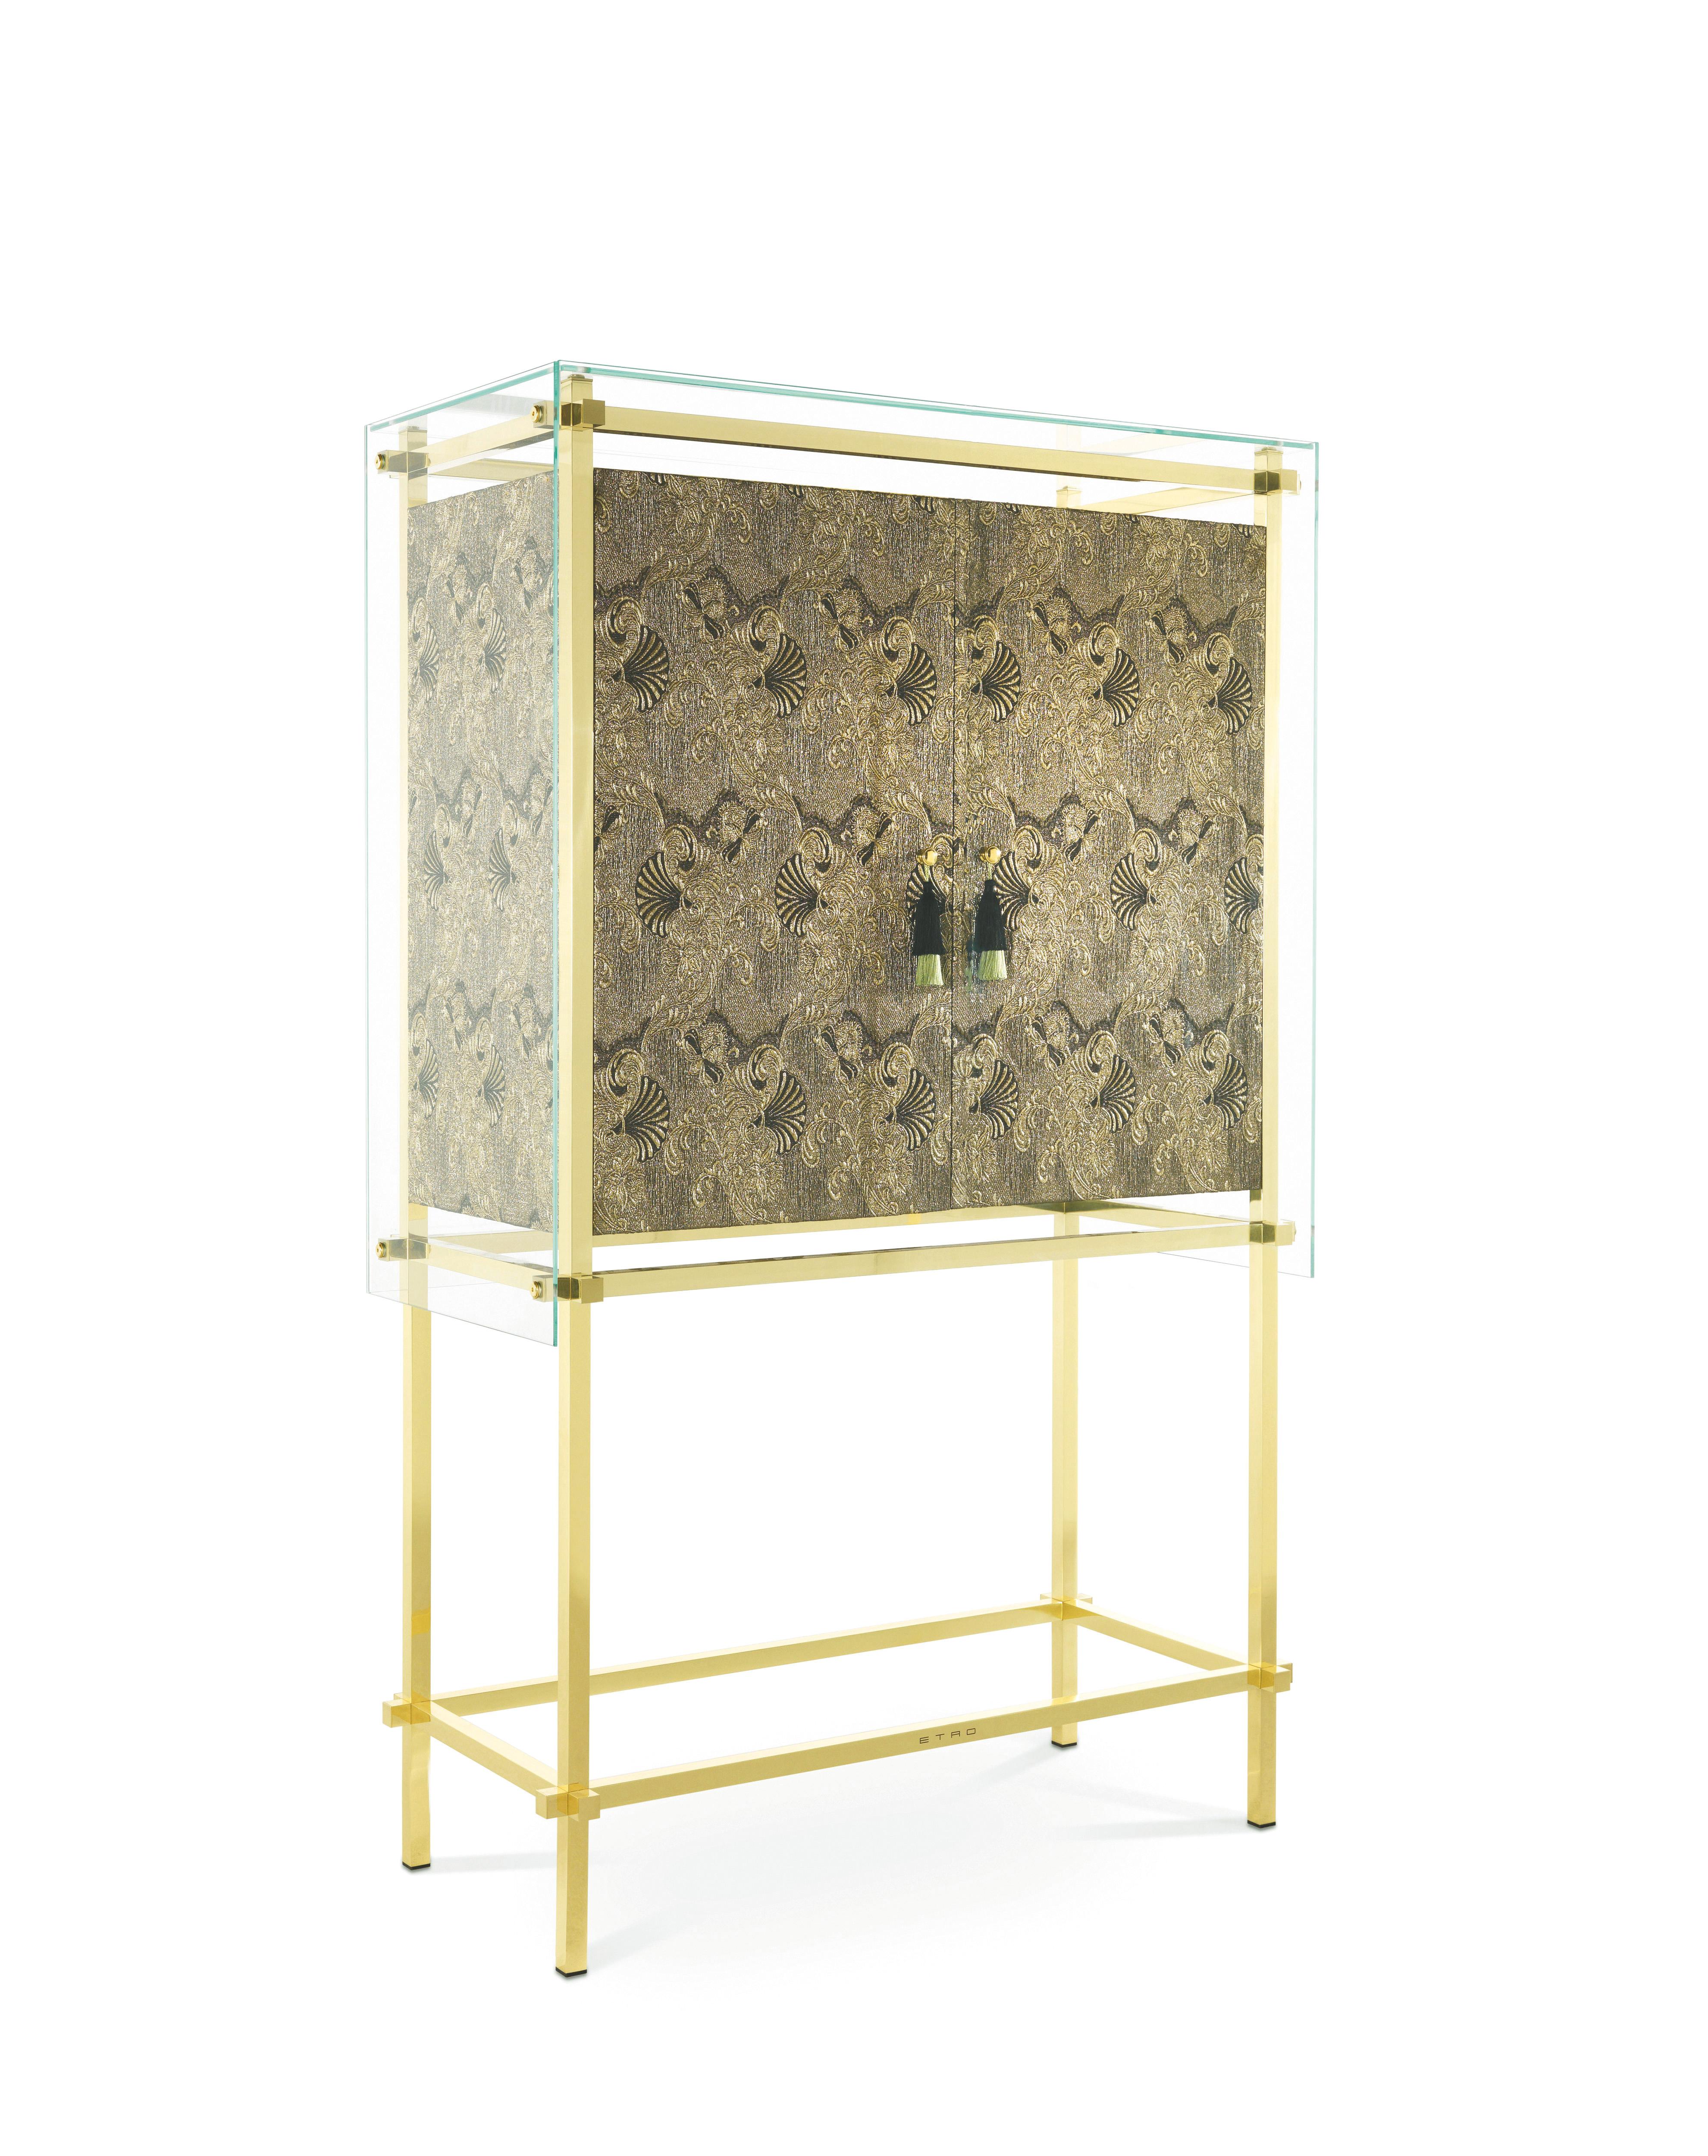 An impactful cabinet featuring precious upholstery in fabric from the Etro Home Interiors collection with oriental-inspired decorative motives and outer
extra clear tempered glass. A mystic and transcendent element with an ethereal and luminous mood